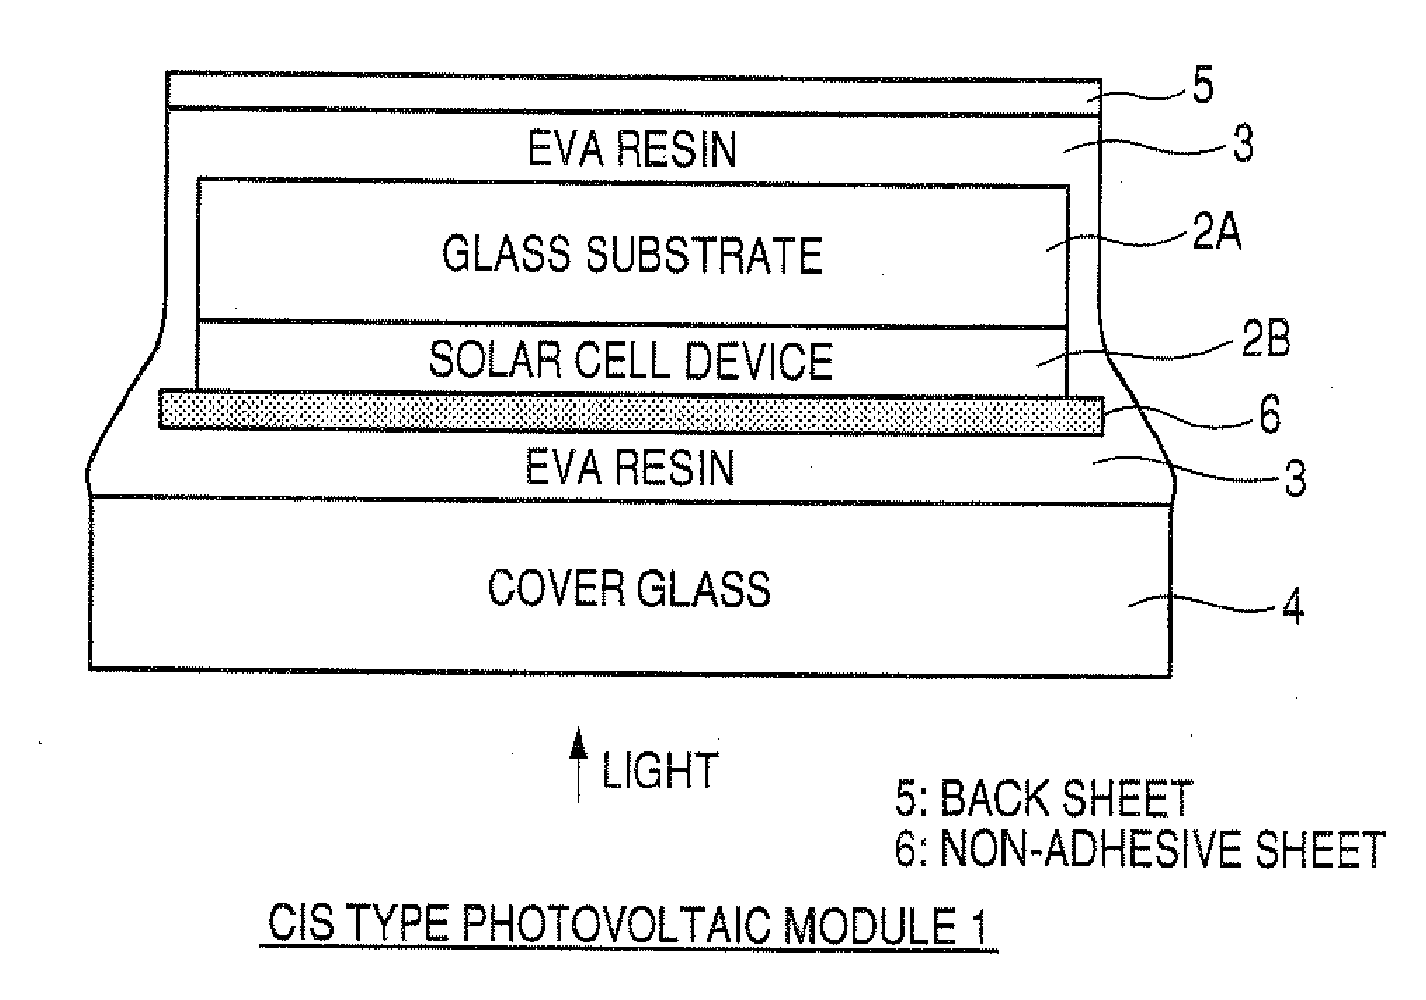 Cis Type Thin-Film Photovoltaic Module, Process for Producing the Photovoltaic Module, and Method of Separating the Module